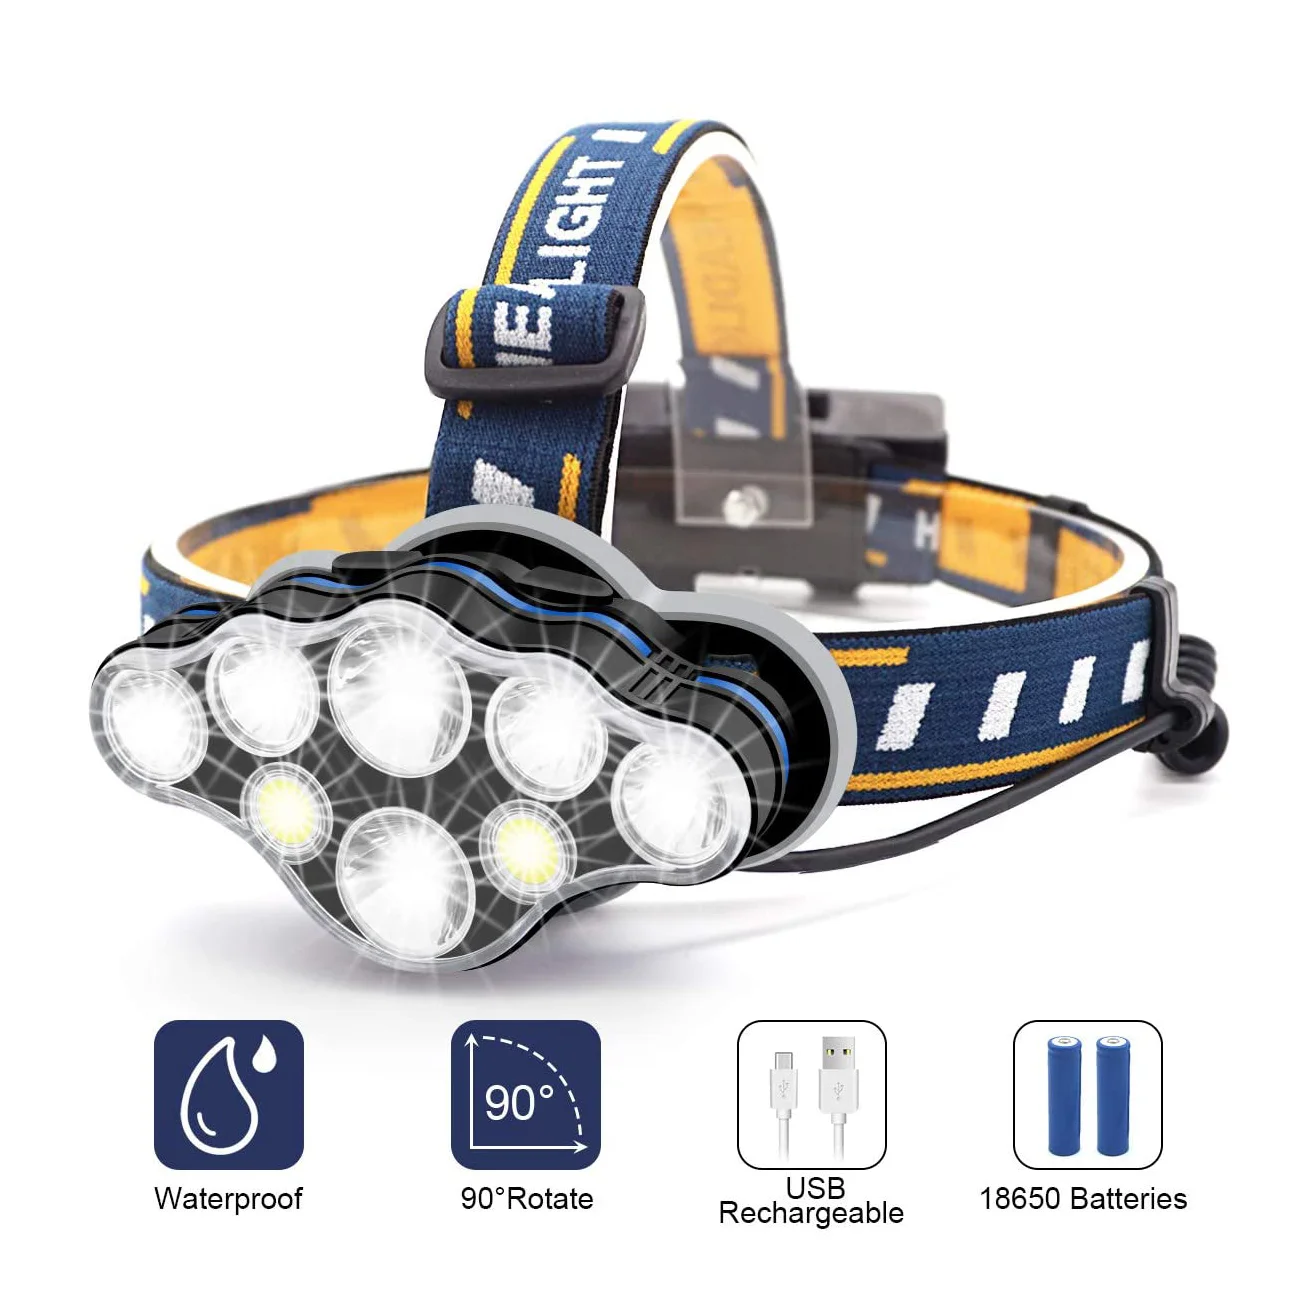 LED Headlight Headlamp Rotating Flashlight for Camping Fishing Rechargeable 